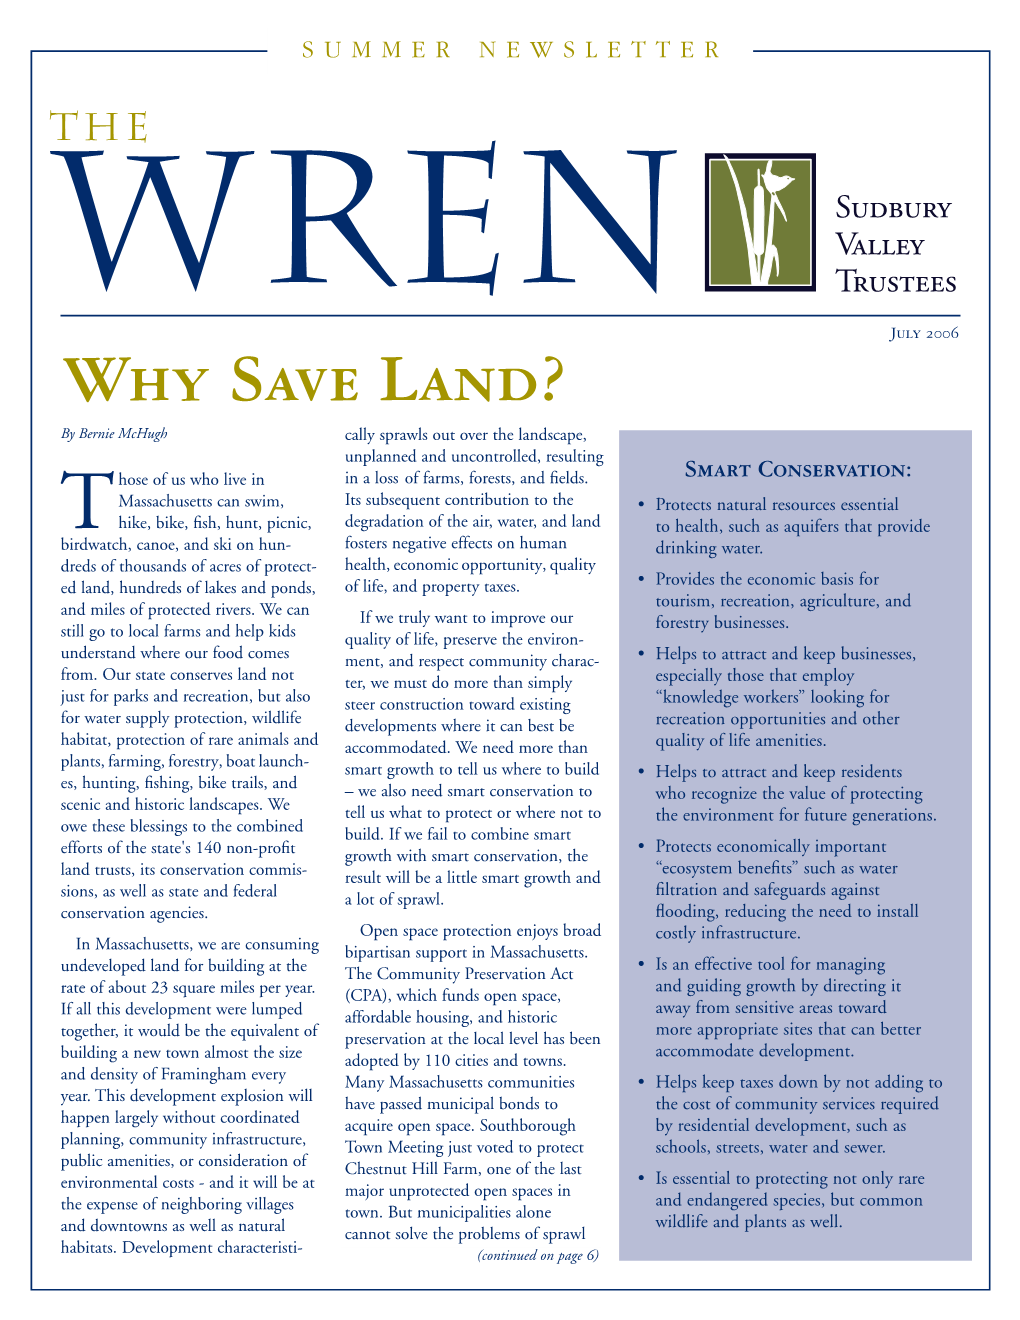 Why Save Land?